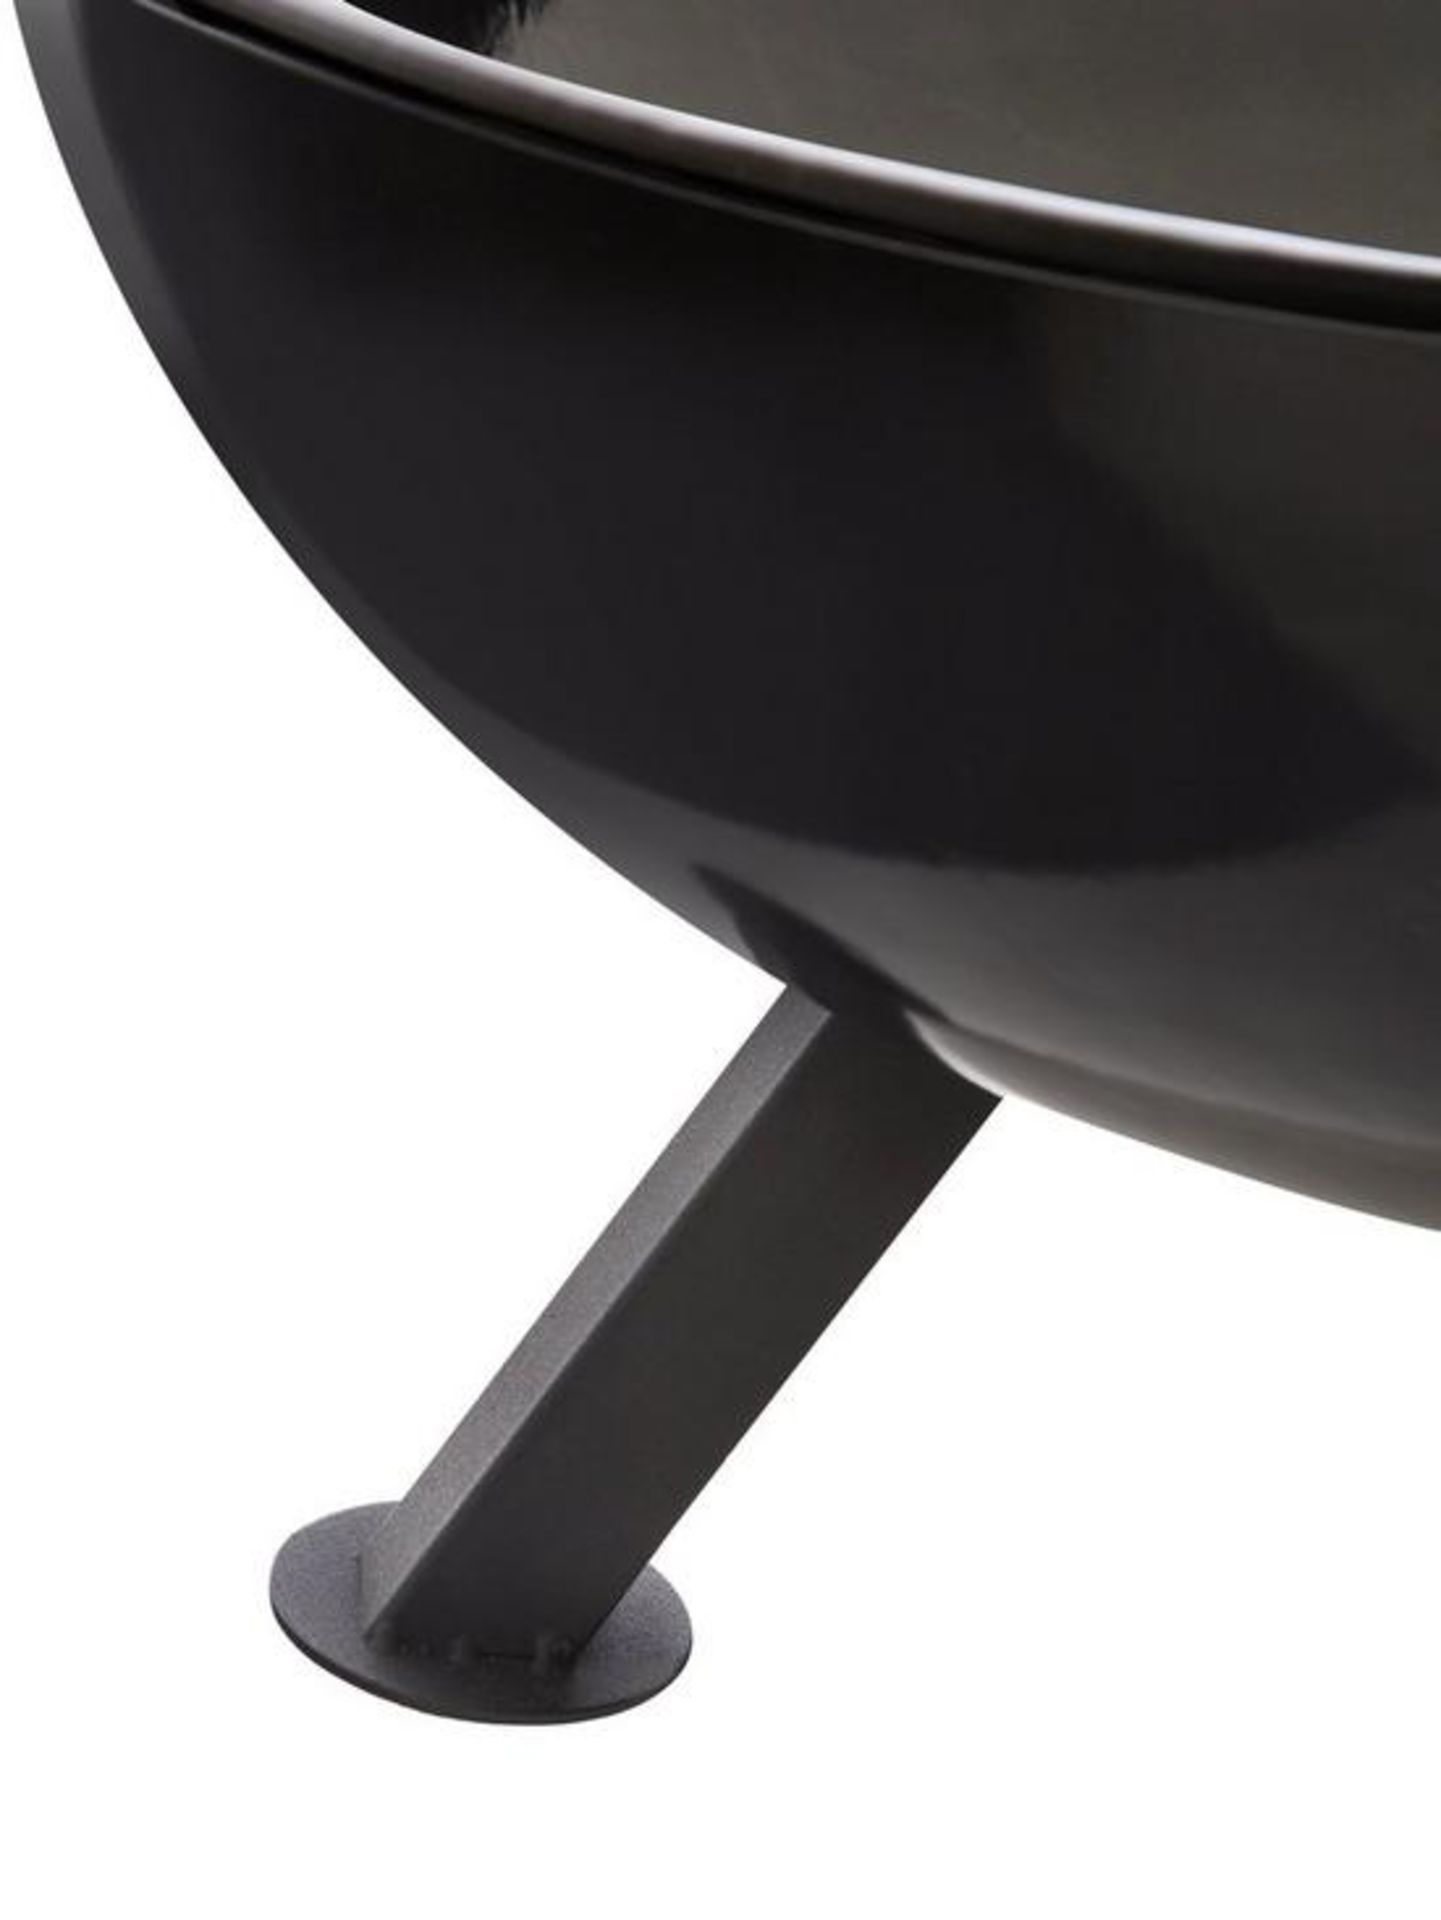 A1 PRODUCT NEW - ALAMO FIRE BOWL IN BLACK - RRP Ã‚Â£75 - Image 4 of 4